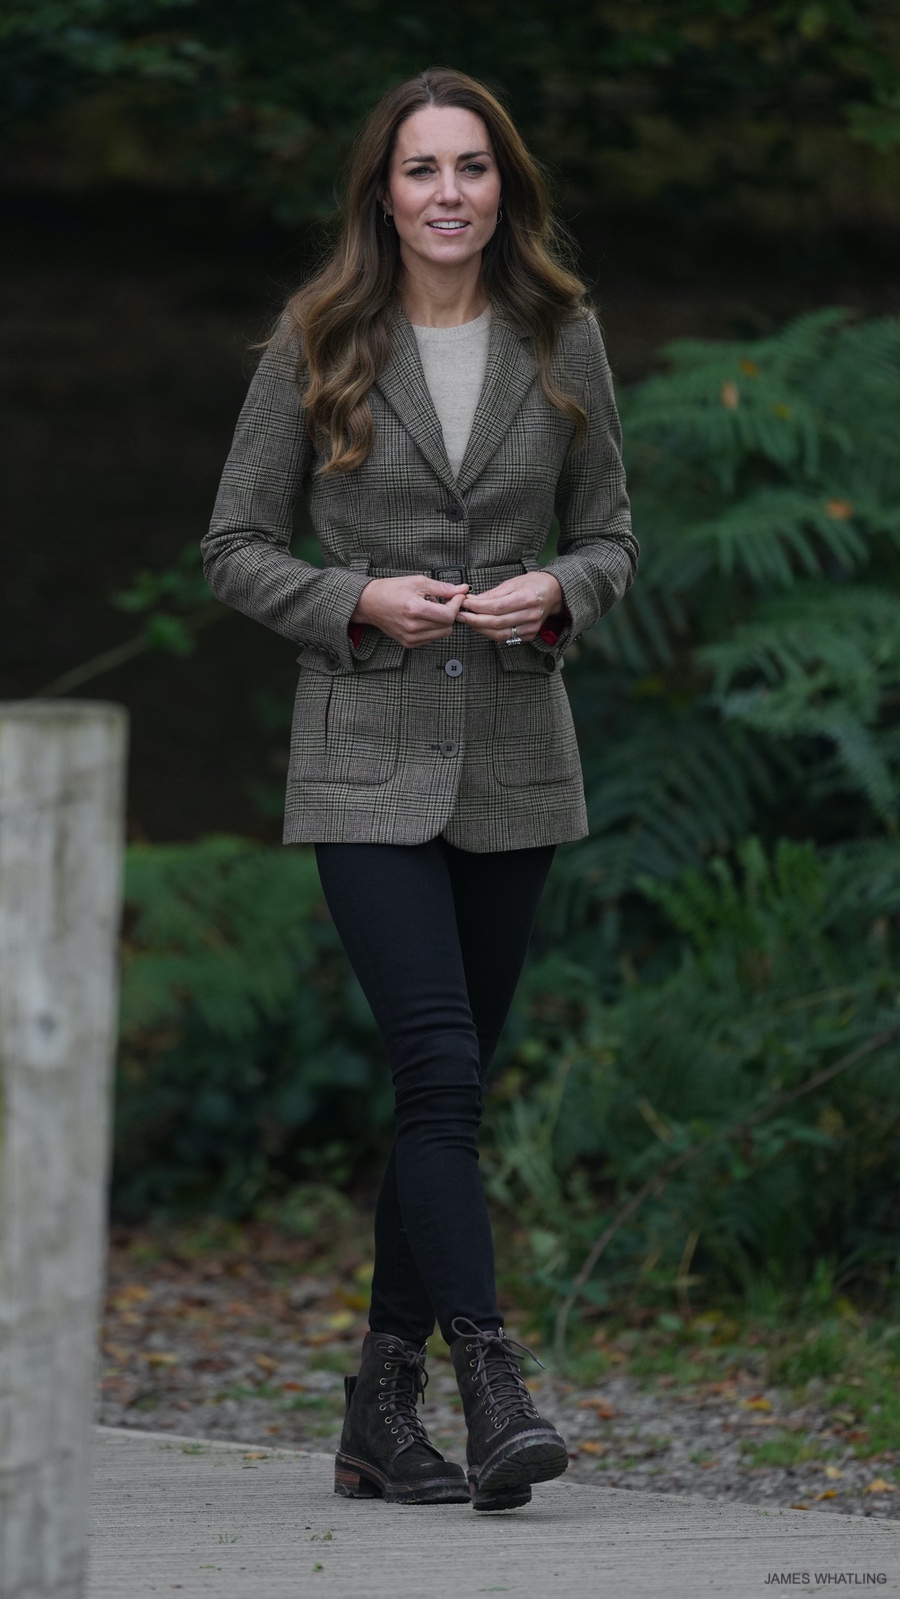 Kate Middleton dressed in a small-casual outfit for this engagement in Cumbria.  